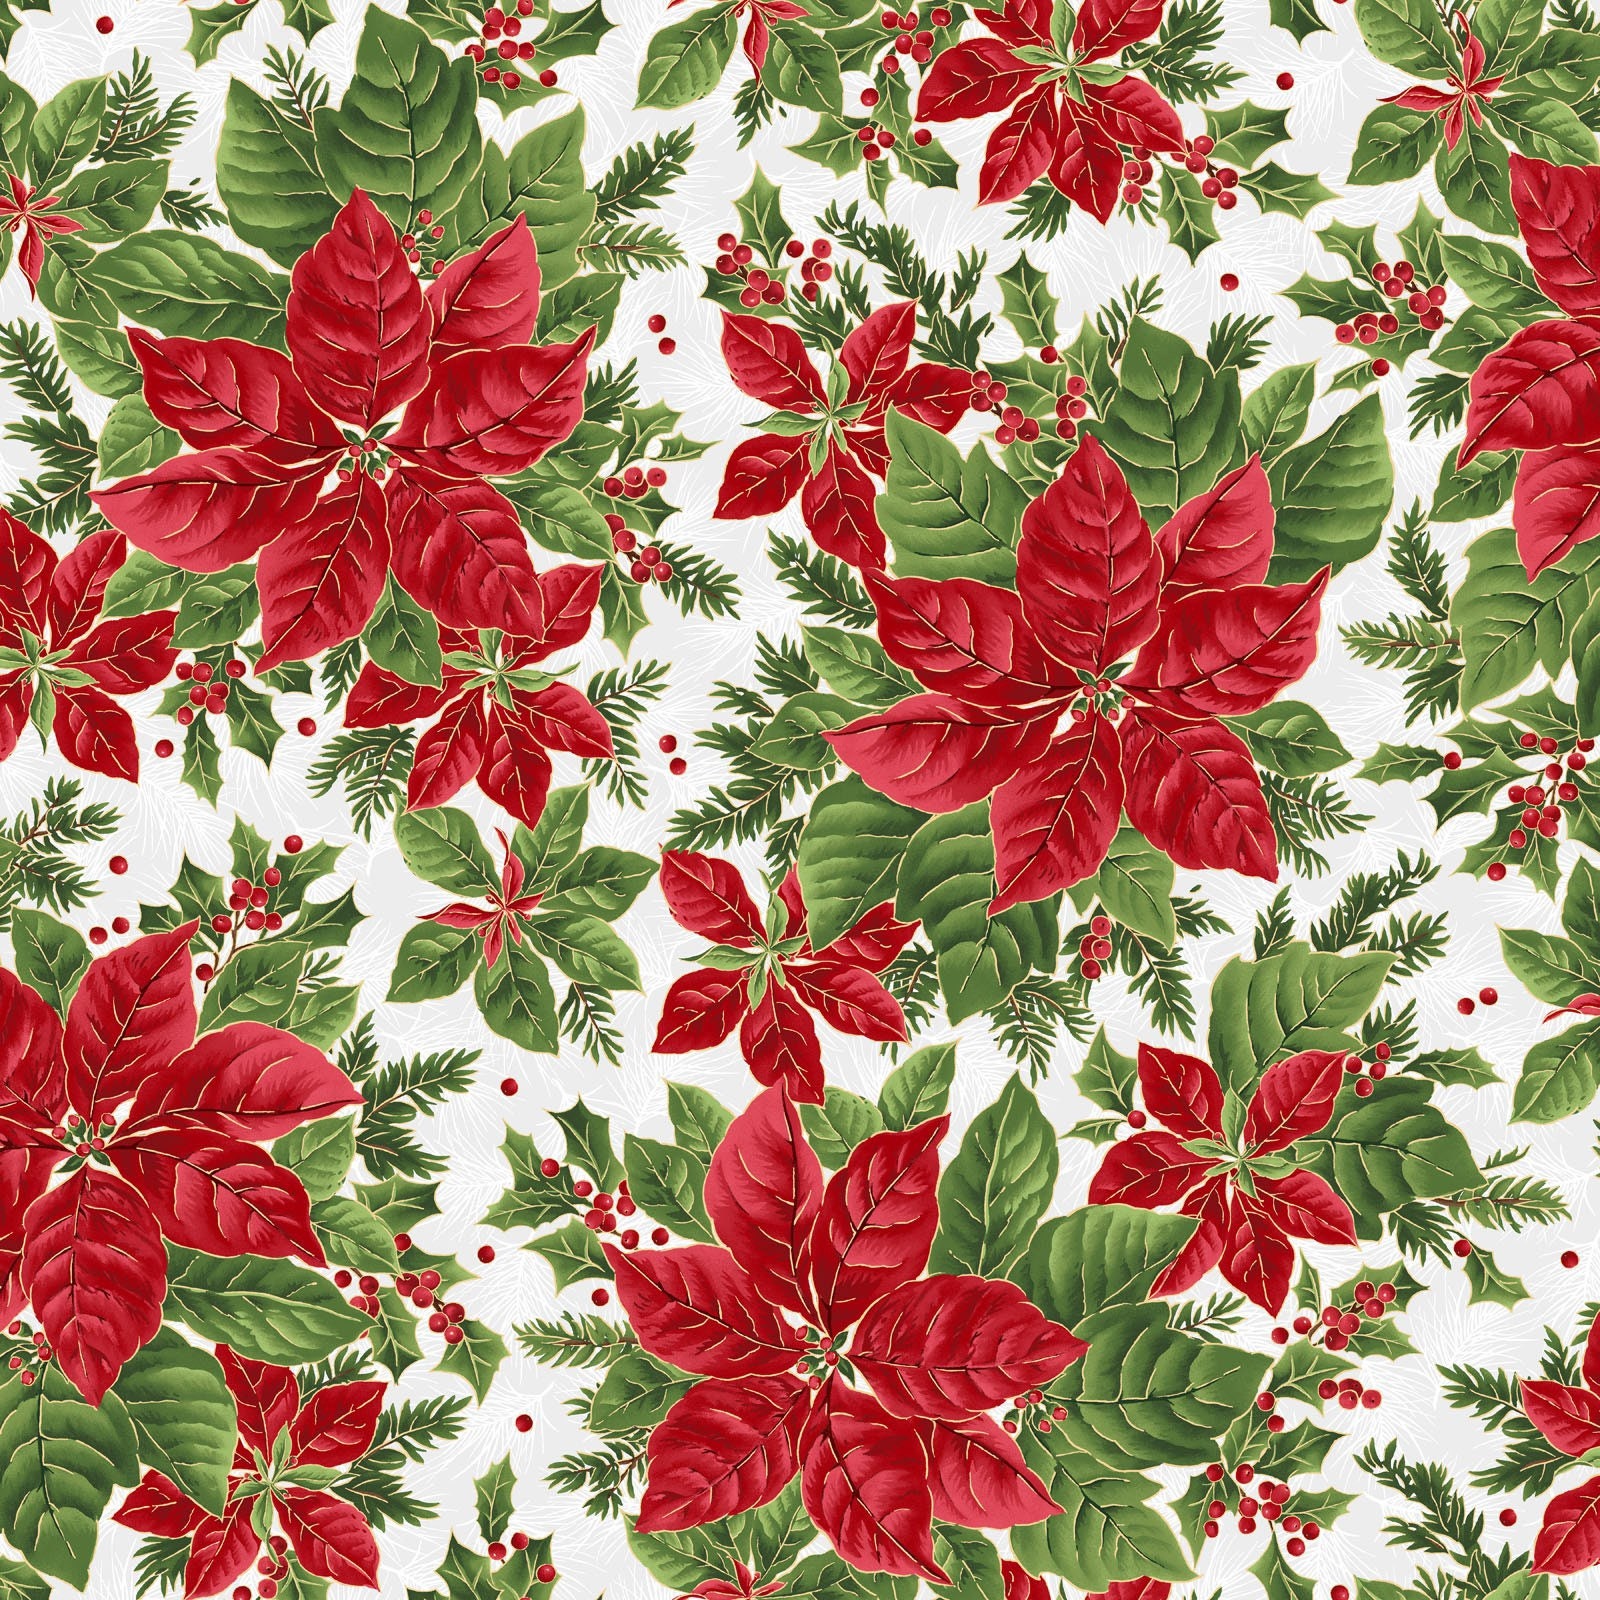 Evergreen Bows Christmas Fabric Jelly Roll 40 Precut Quilt Strips 2.5 X 44  100% Cotton Quilt Fabric by Maywood Studios 